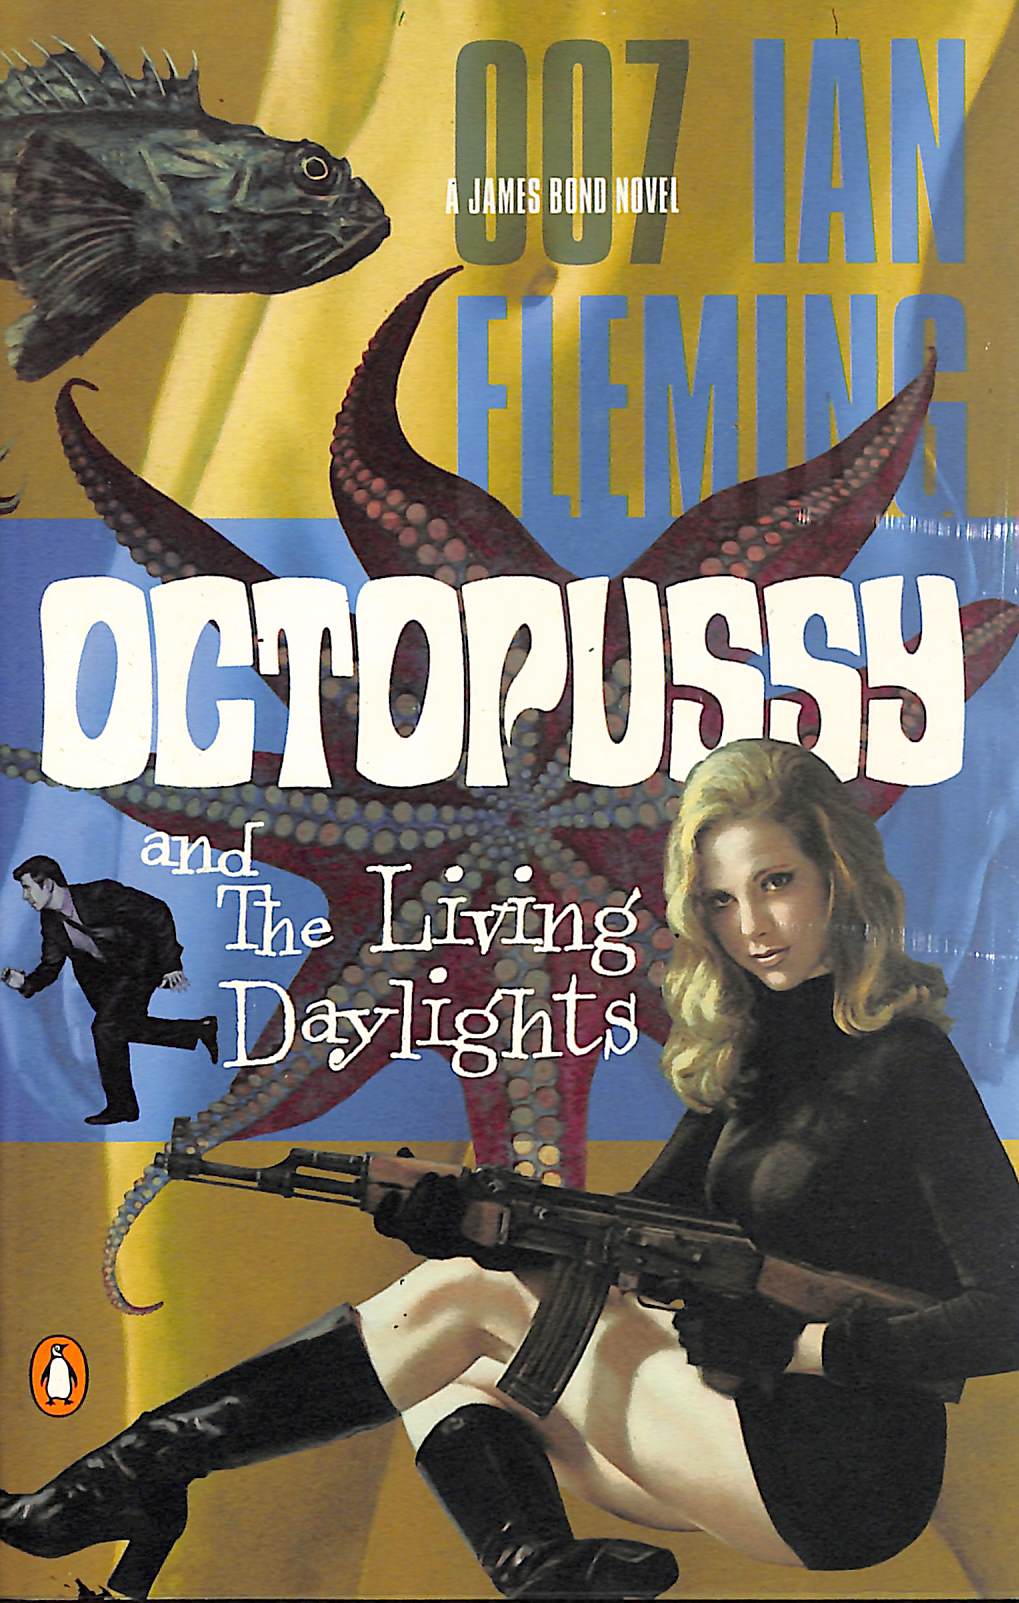 "Octopussy And The Living Daylight" 2004 FLEMING, Ian